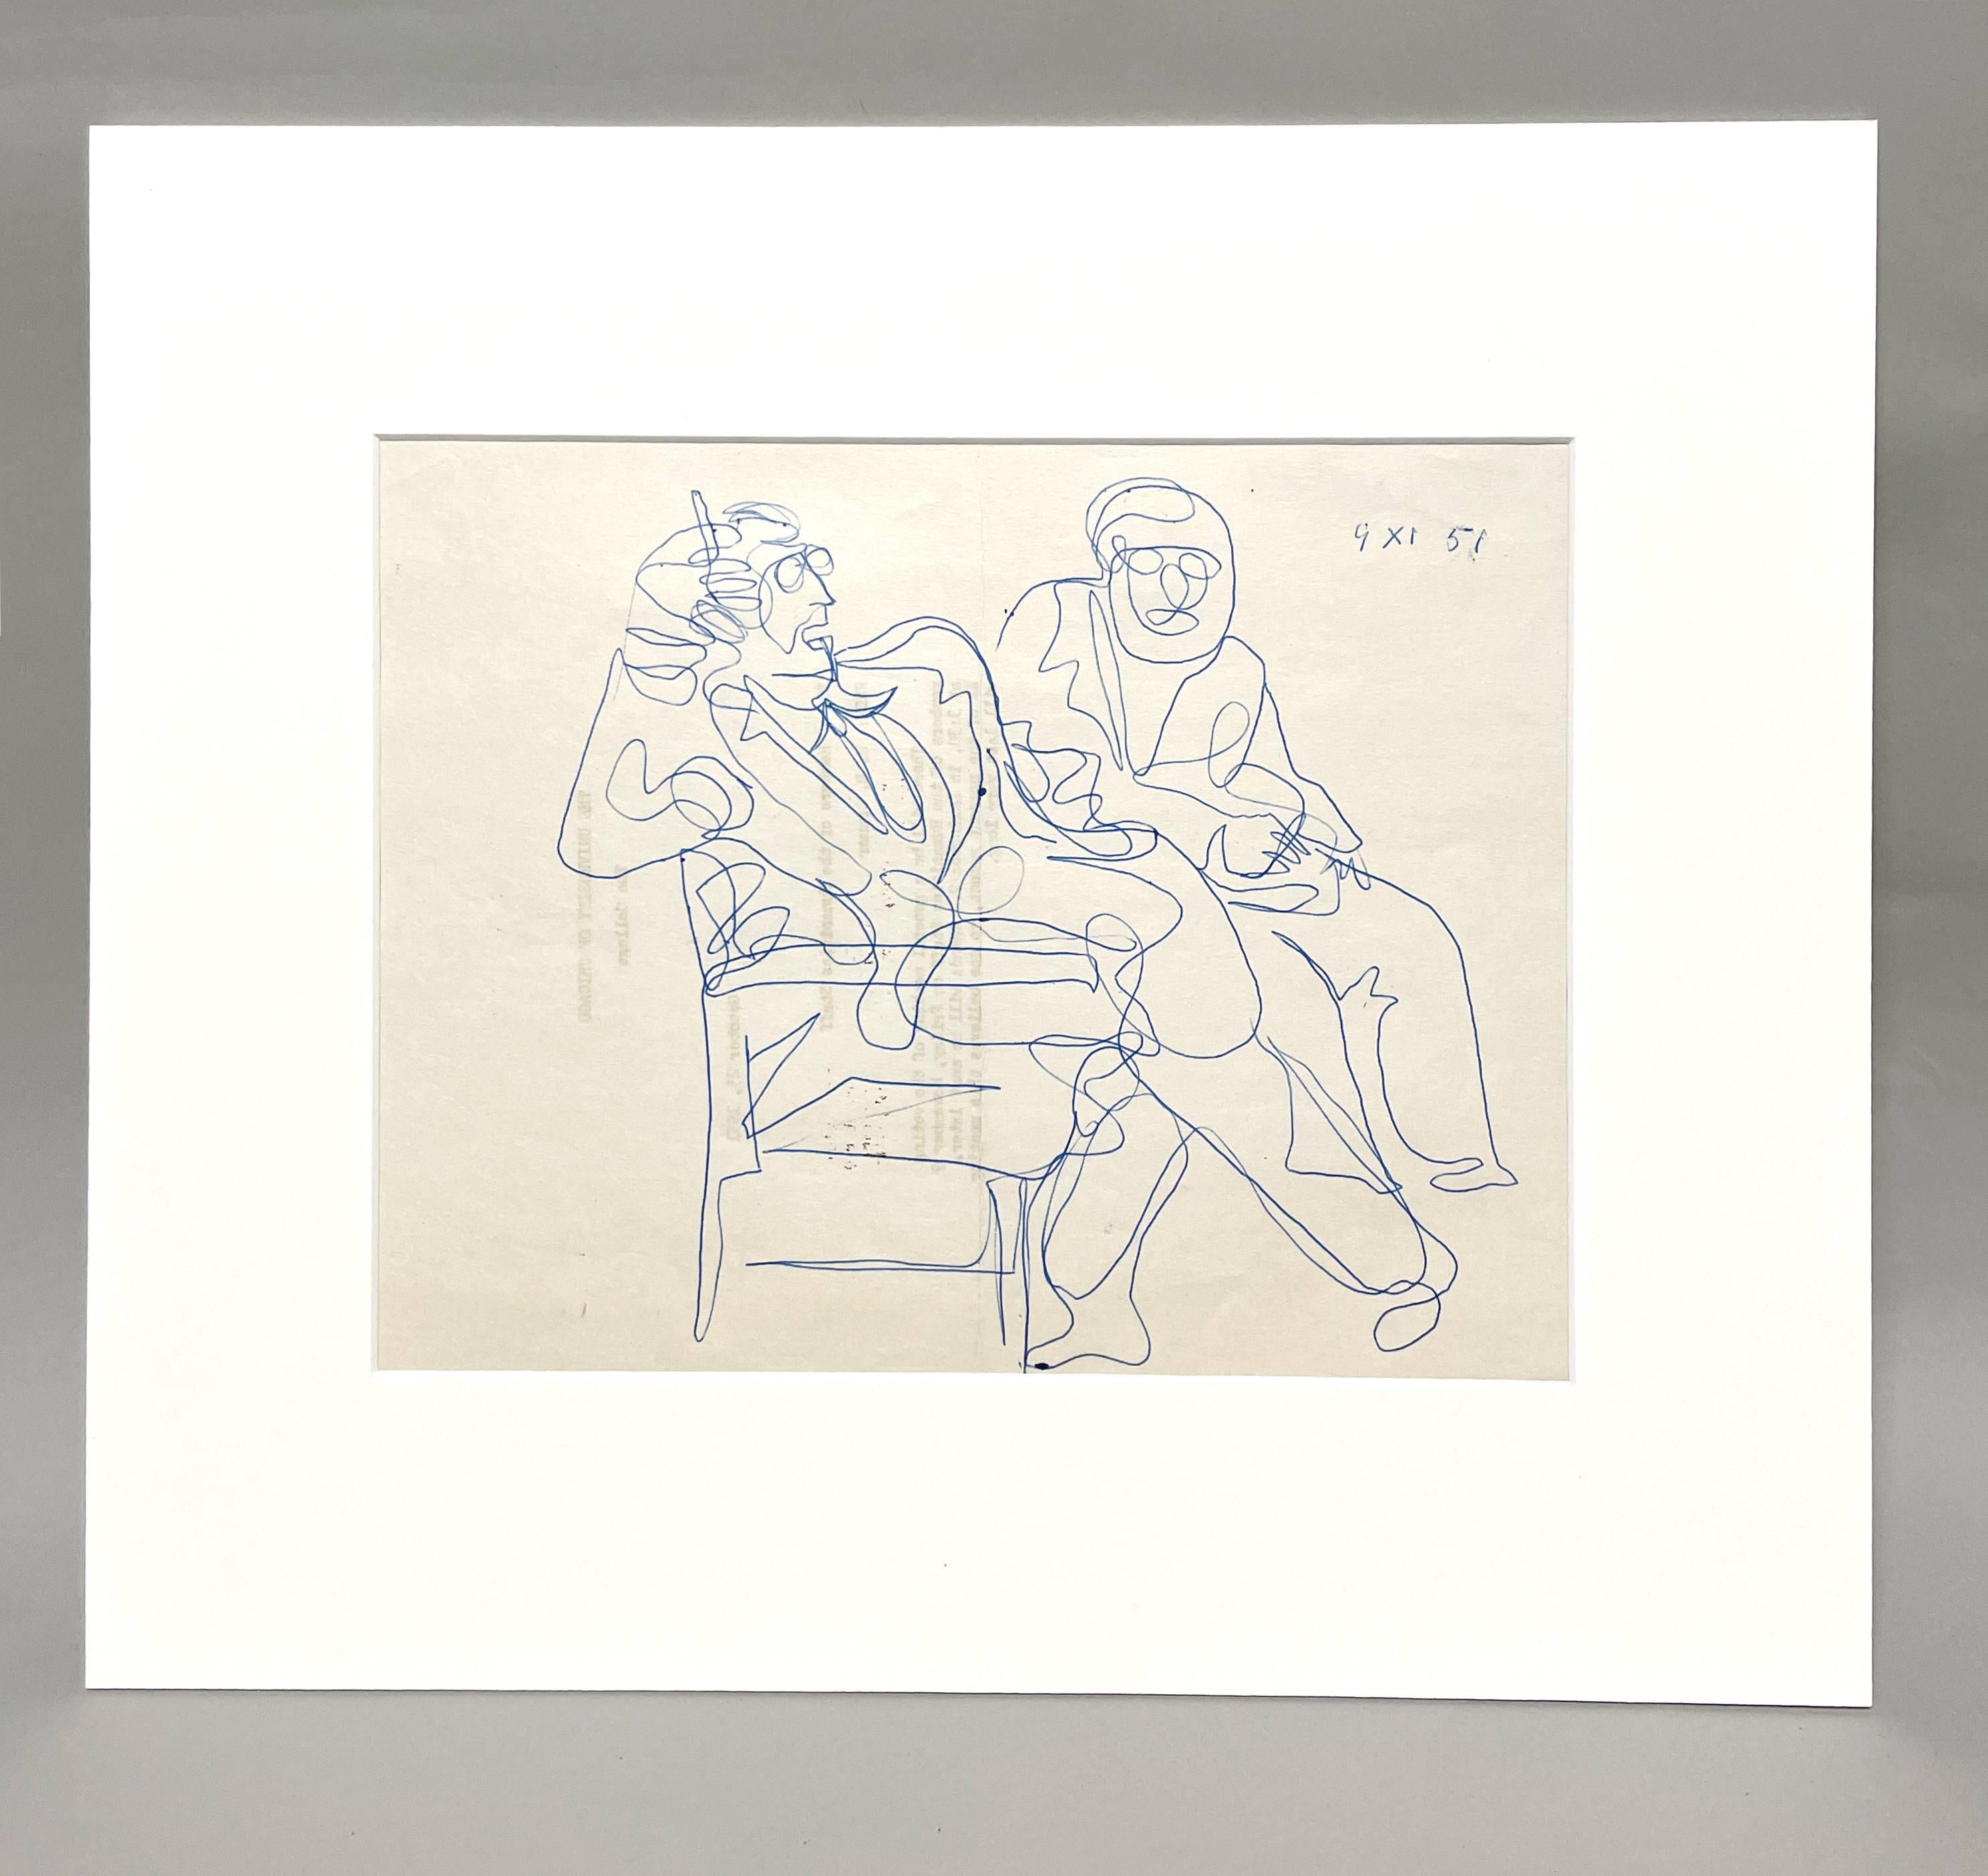 An ink on paper figure study by artist Harold Haydon that depicts a conversation.

Harold Emerson Haydon was born in Fort William, Ontario, Canada in 1909.   Haydon came to Chicago with his family in 1917 and became a naturalized American citizen in